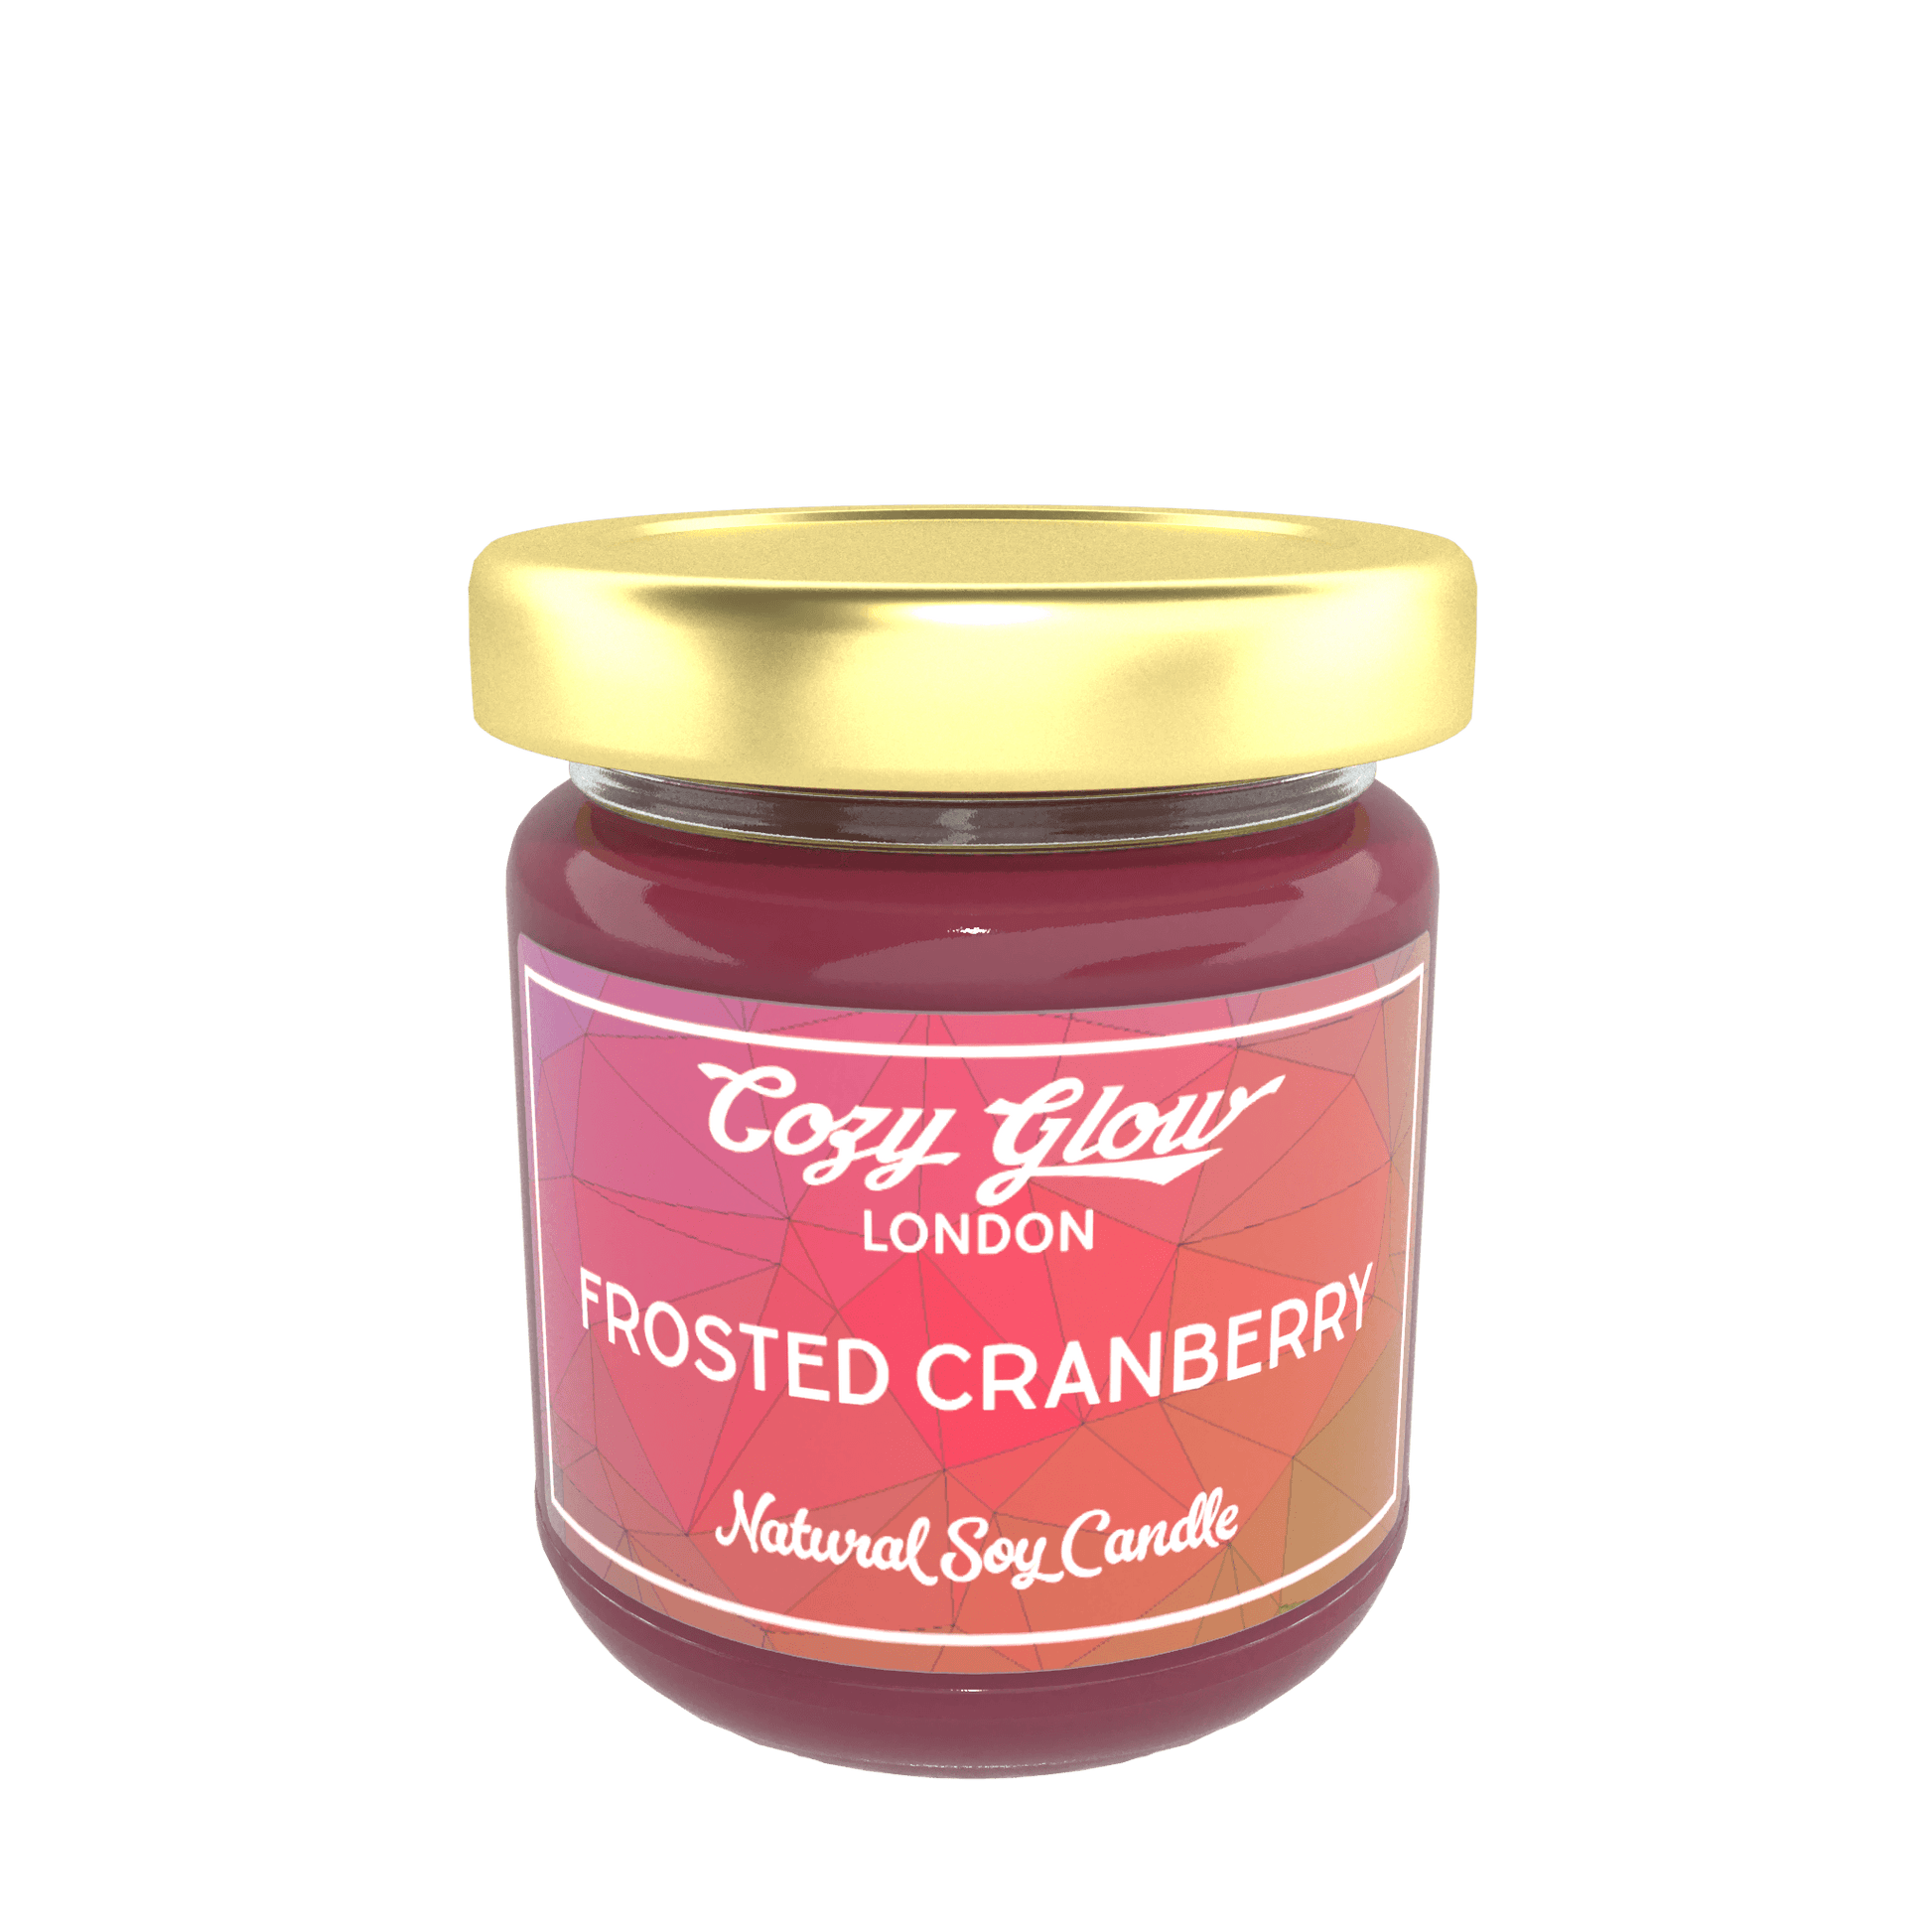 Cozy Glow Frosted Cranberry Regular Soy Candle